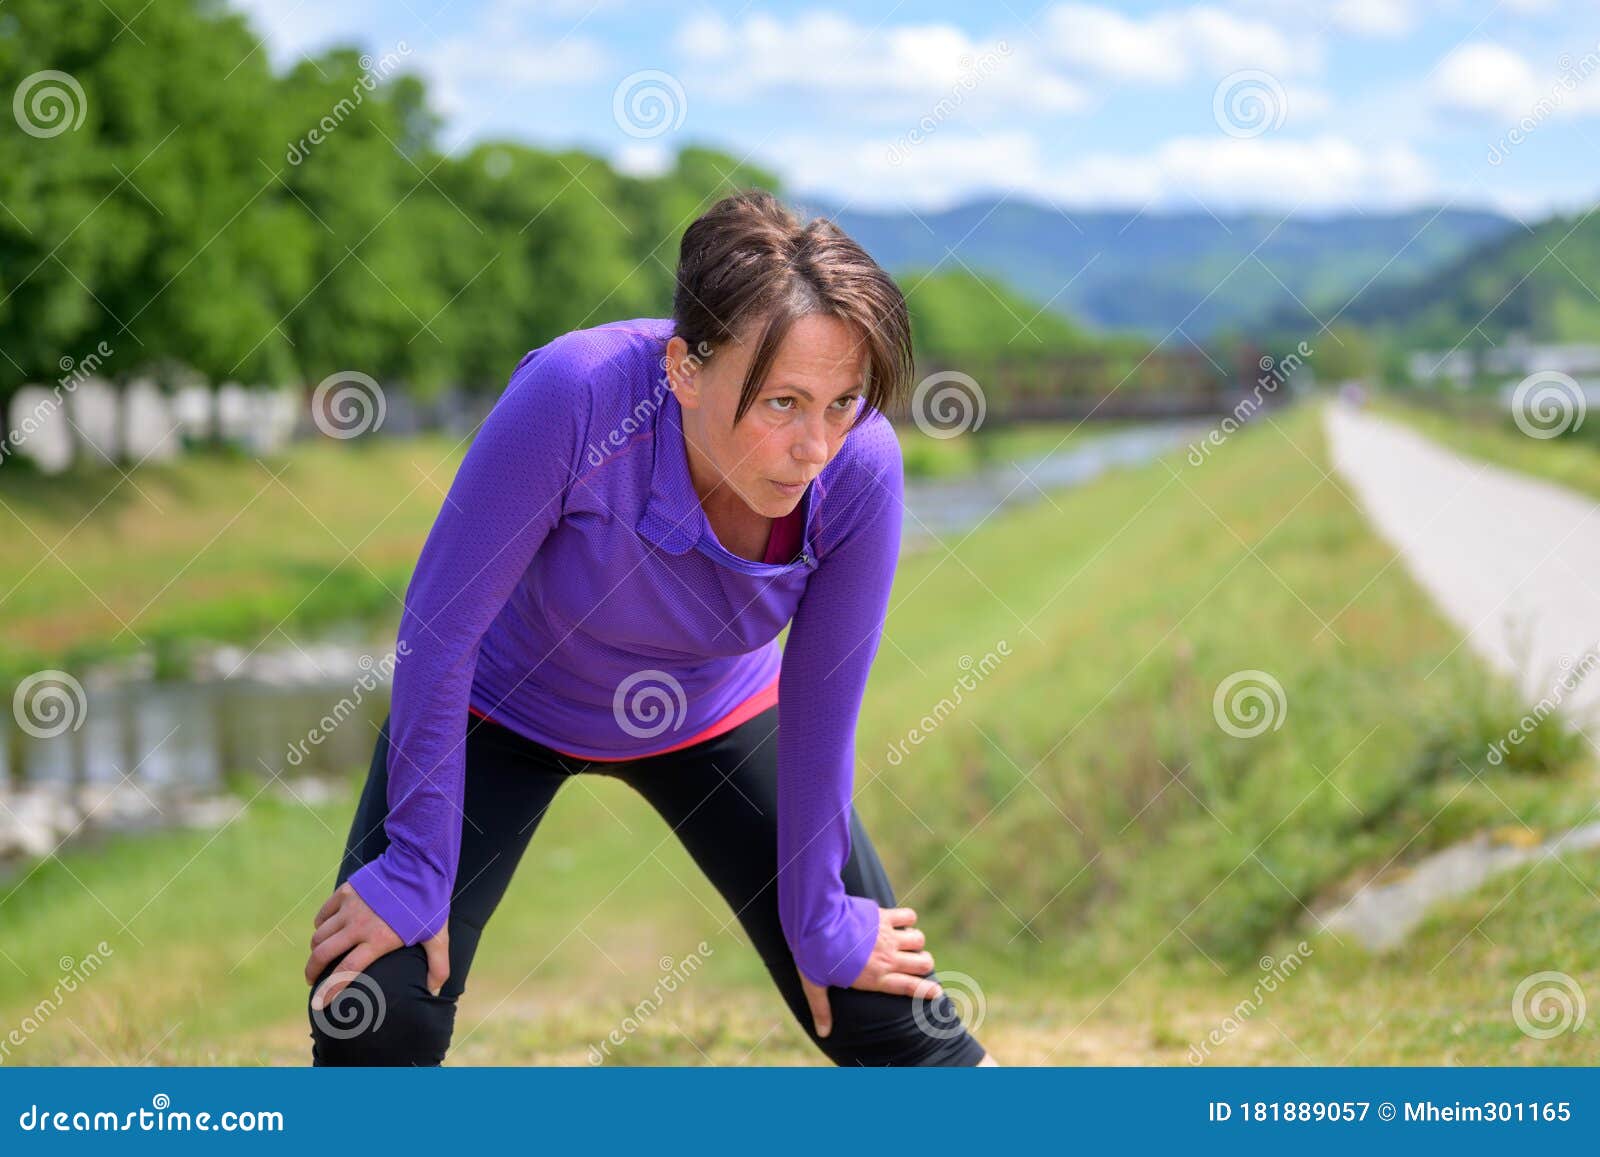 Exhausted Woman Jogger Taking A Break Stock Image I